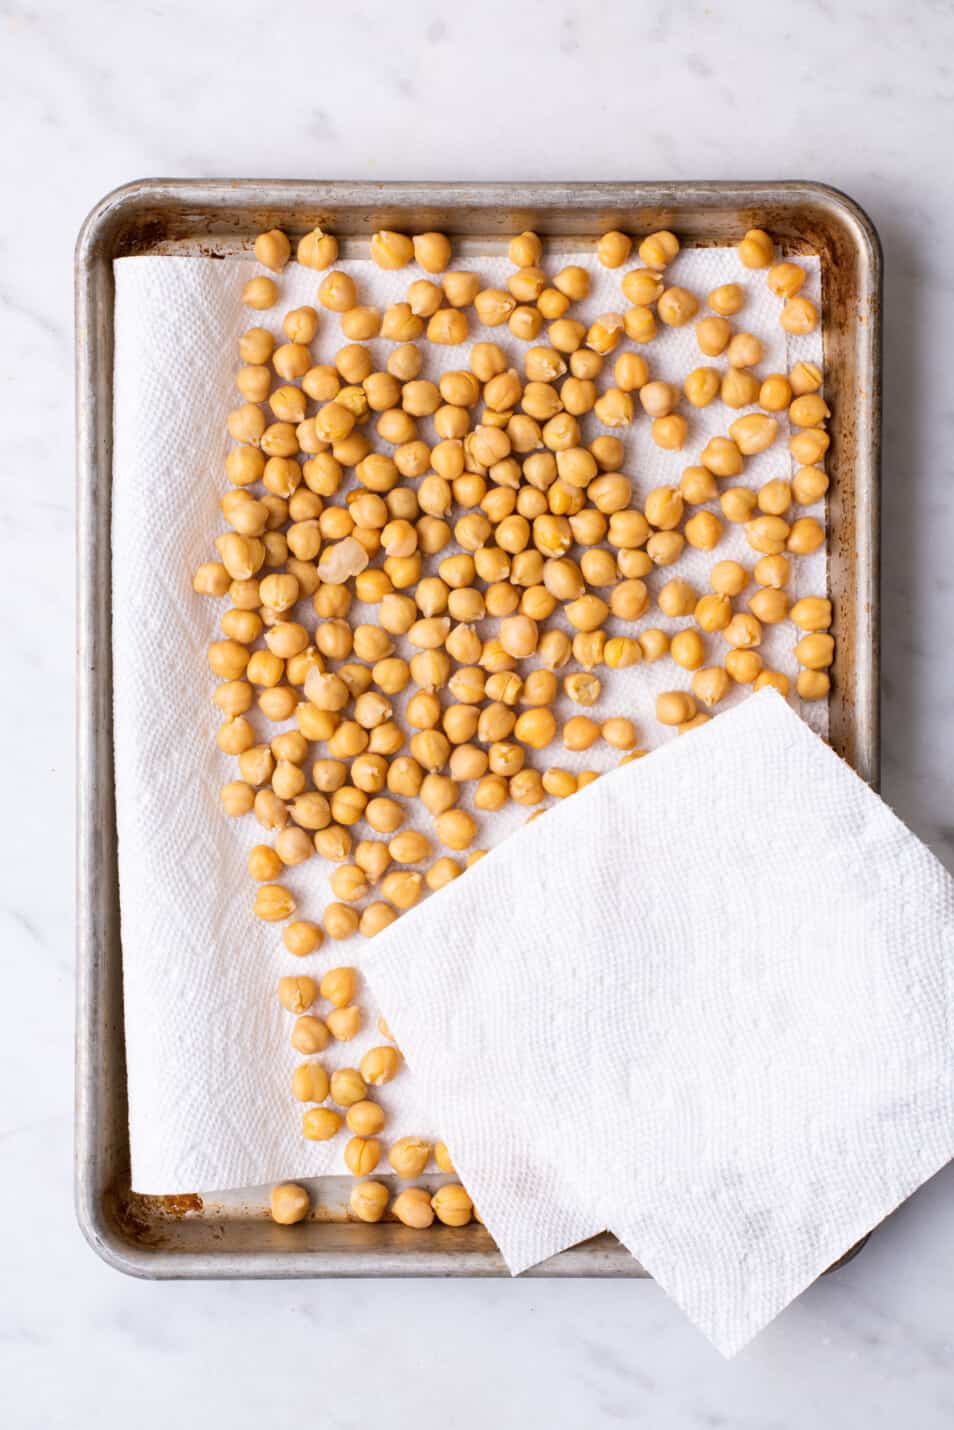 Patting chickpeas dry with paper towels.